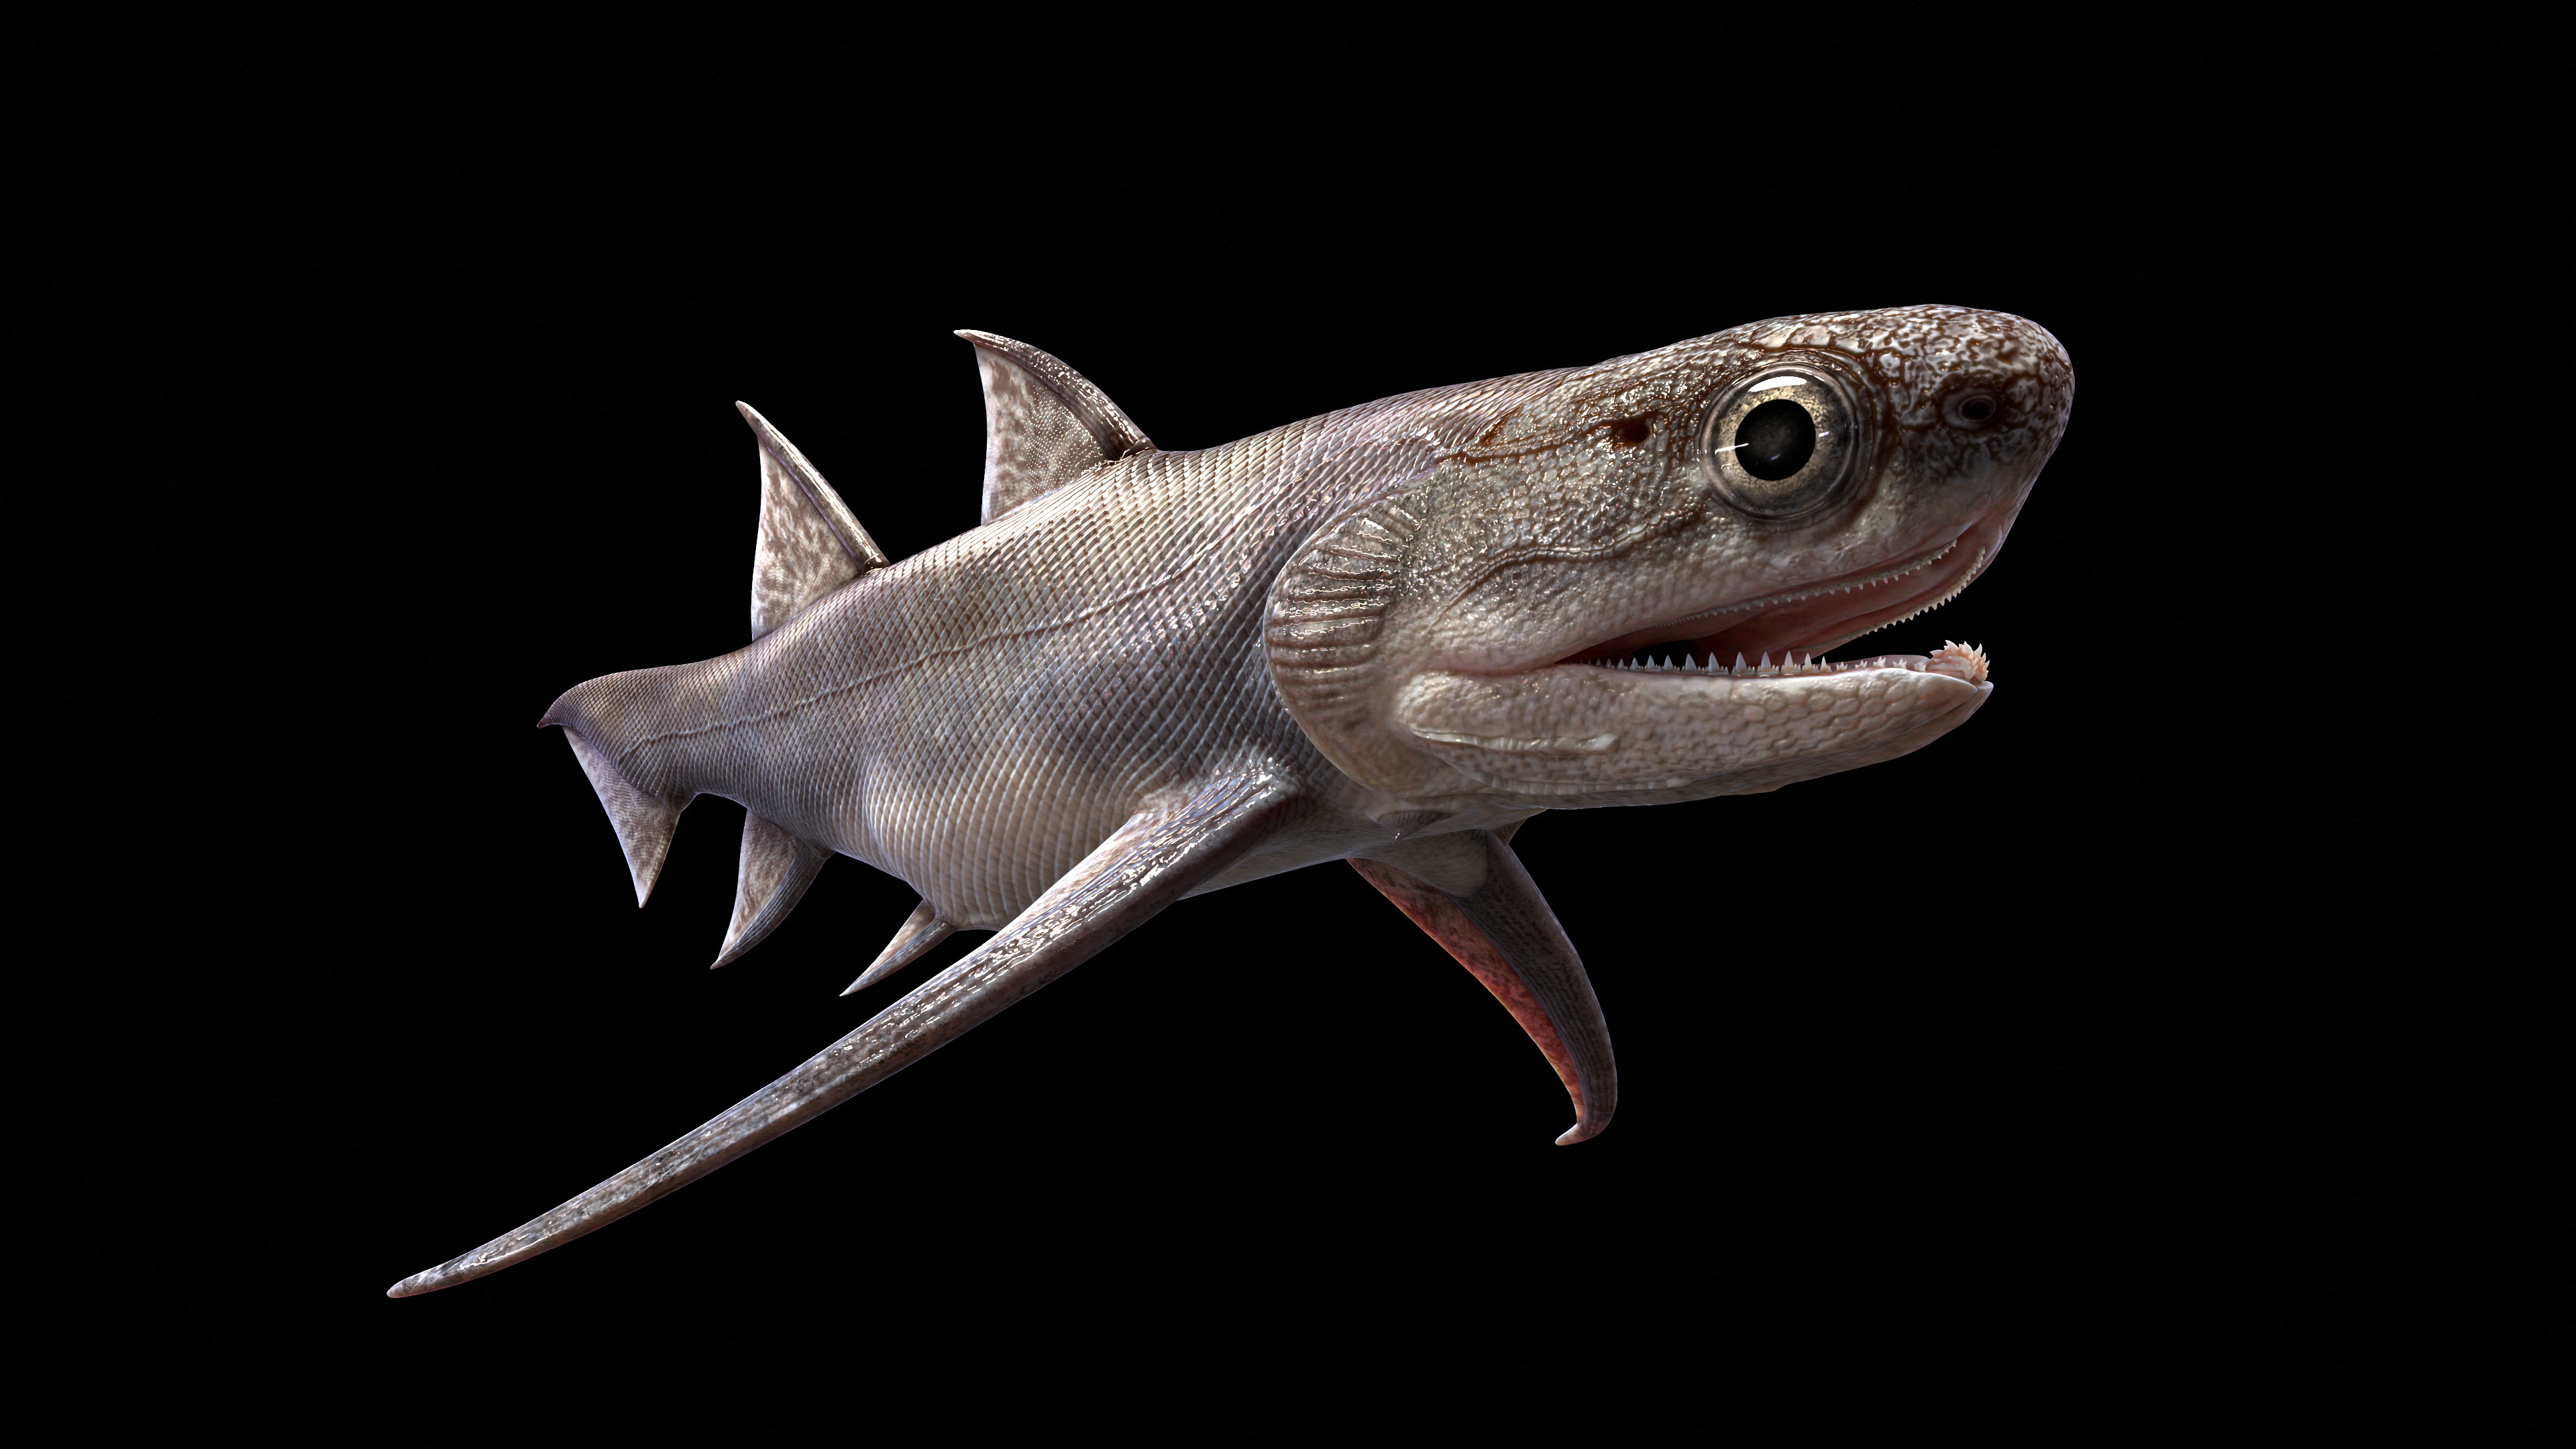 An artist's life reconstruction of the Silurian Period fish Qianodus duplicis